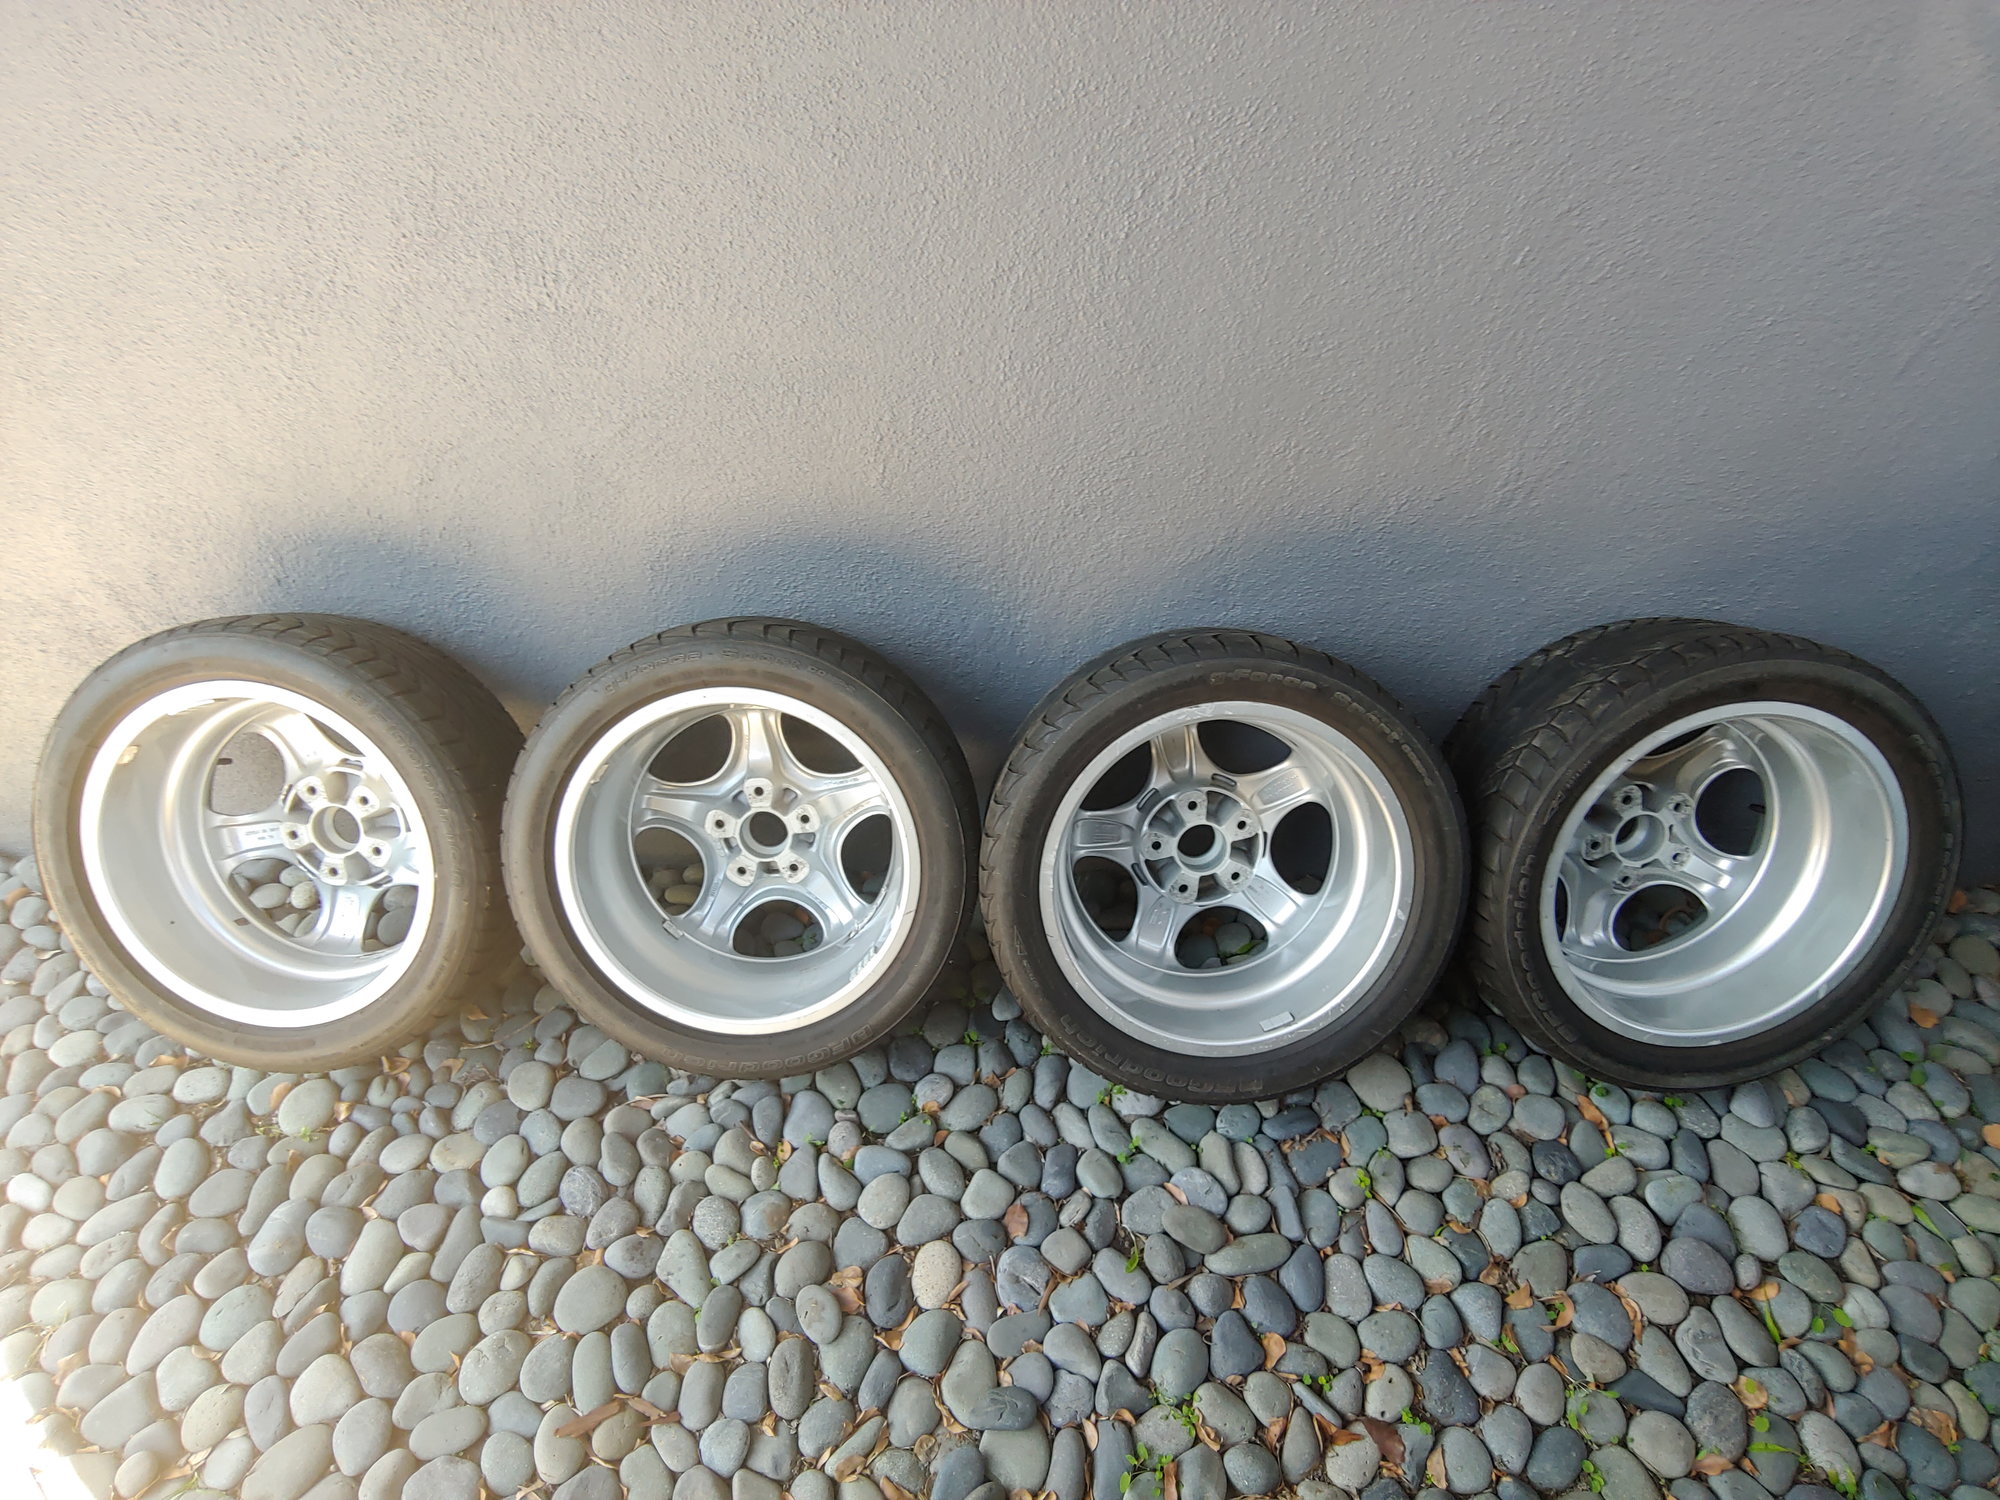 FS: OEM 17" Cup 1 wheels from RS America - Los Angeles, CA ...